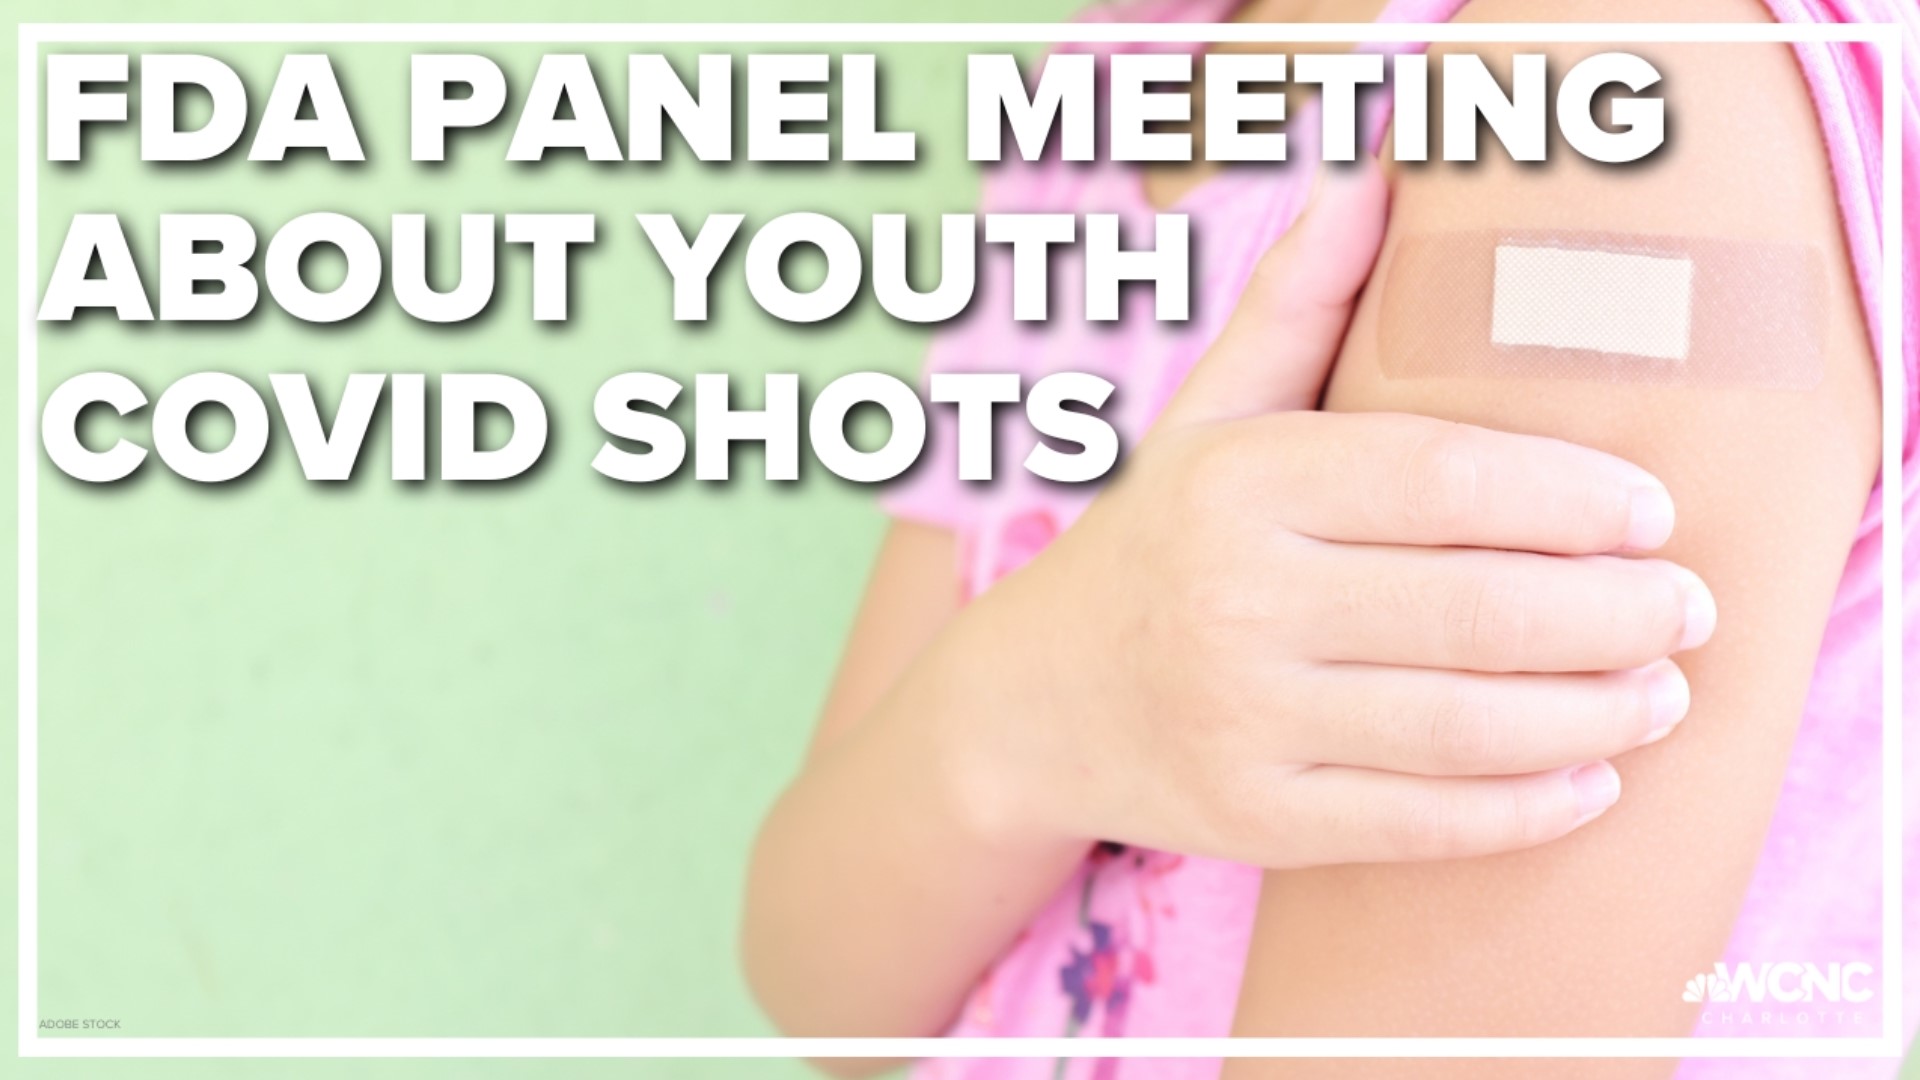 The FDA's advisory panel is meeting this week to discuss COVID-19 vaccinations for young kids currently not eligible.